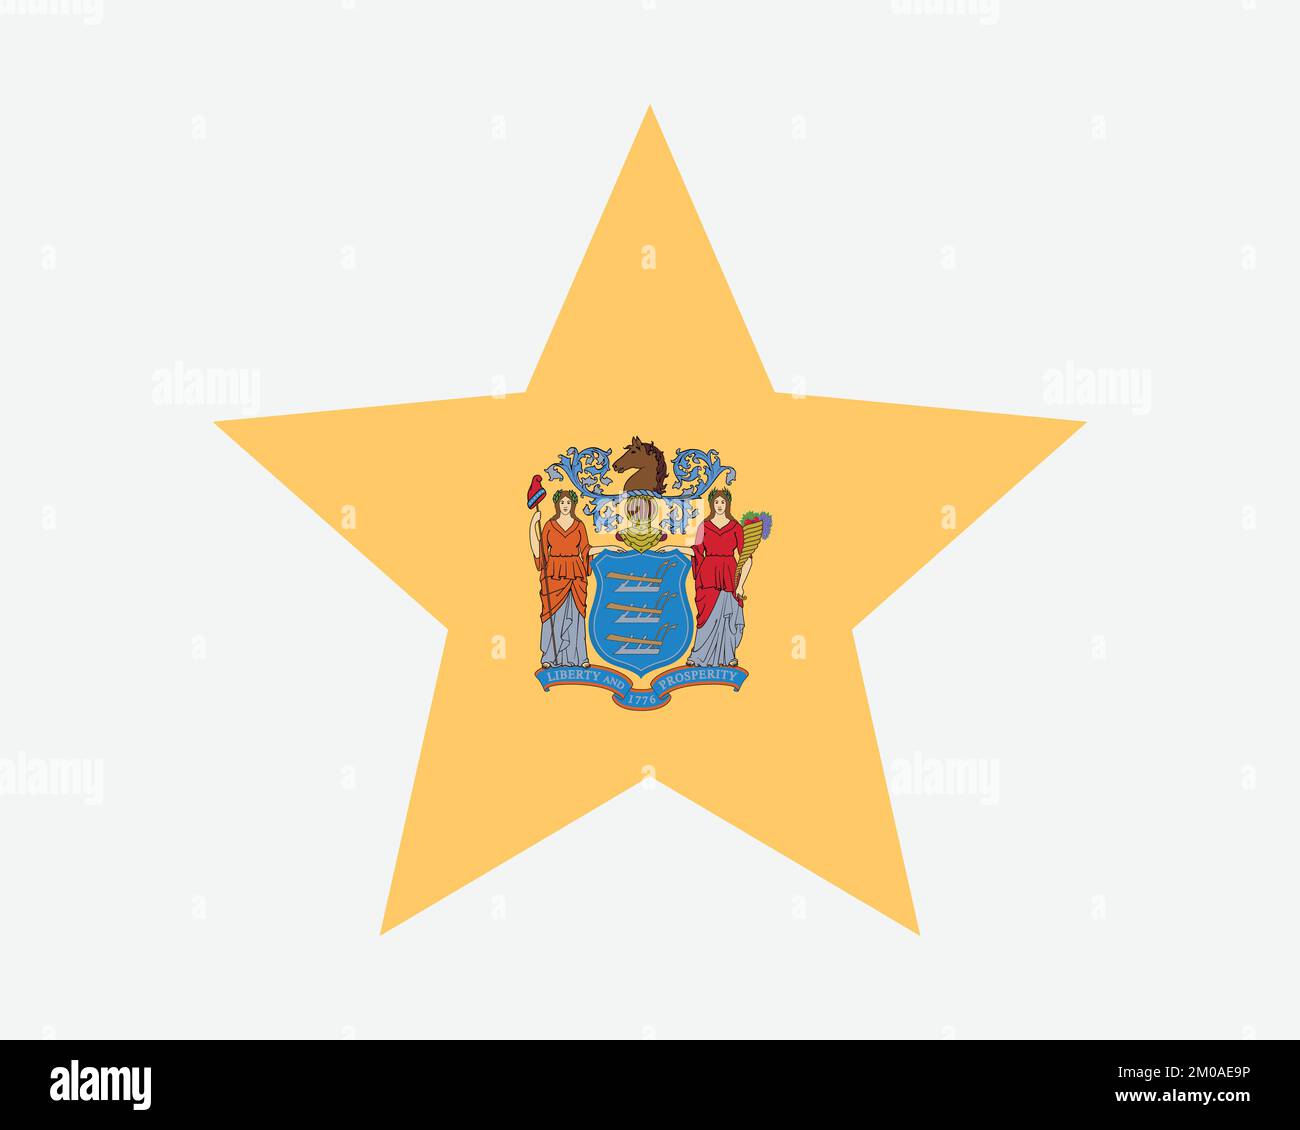 New Jersey Star Flag. NJ USA Five Point Star Shape State Flag. New Jerseyan Jerseyite US Banner Icon Symbol Vector Flat Artwork Graphic Illustration Stock Vector